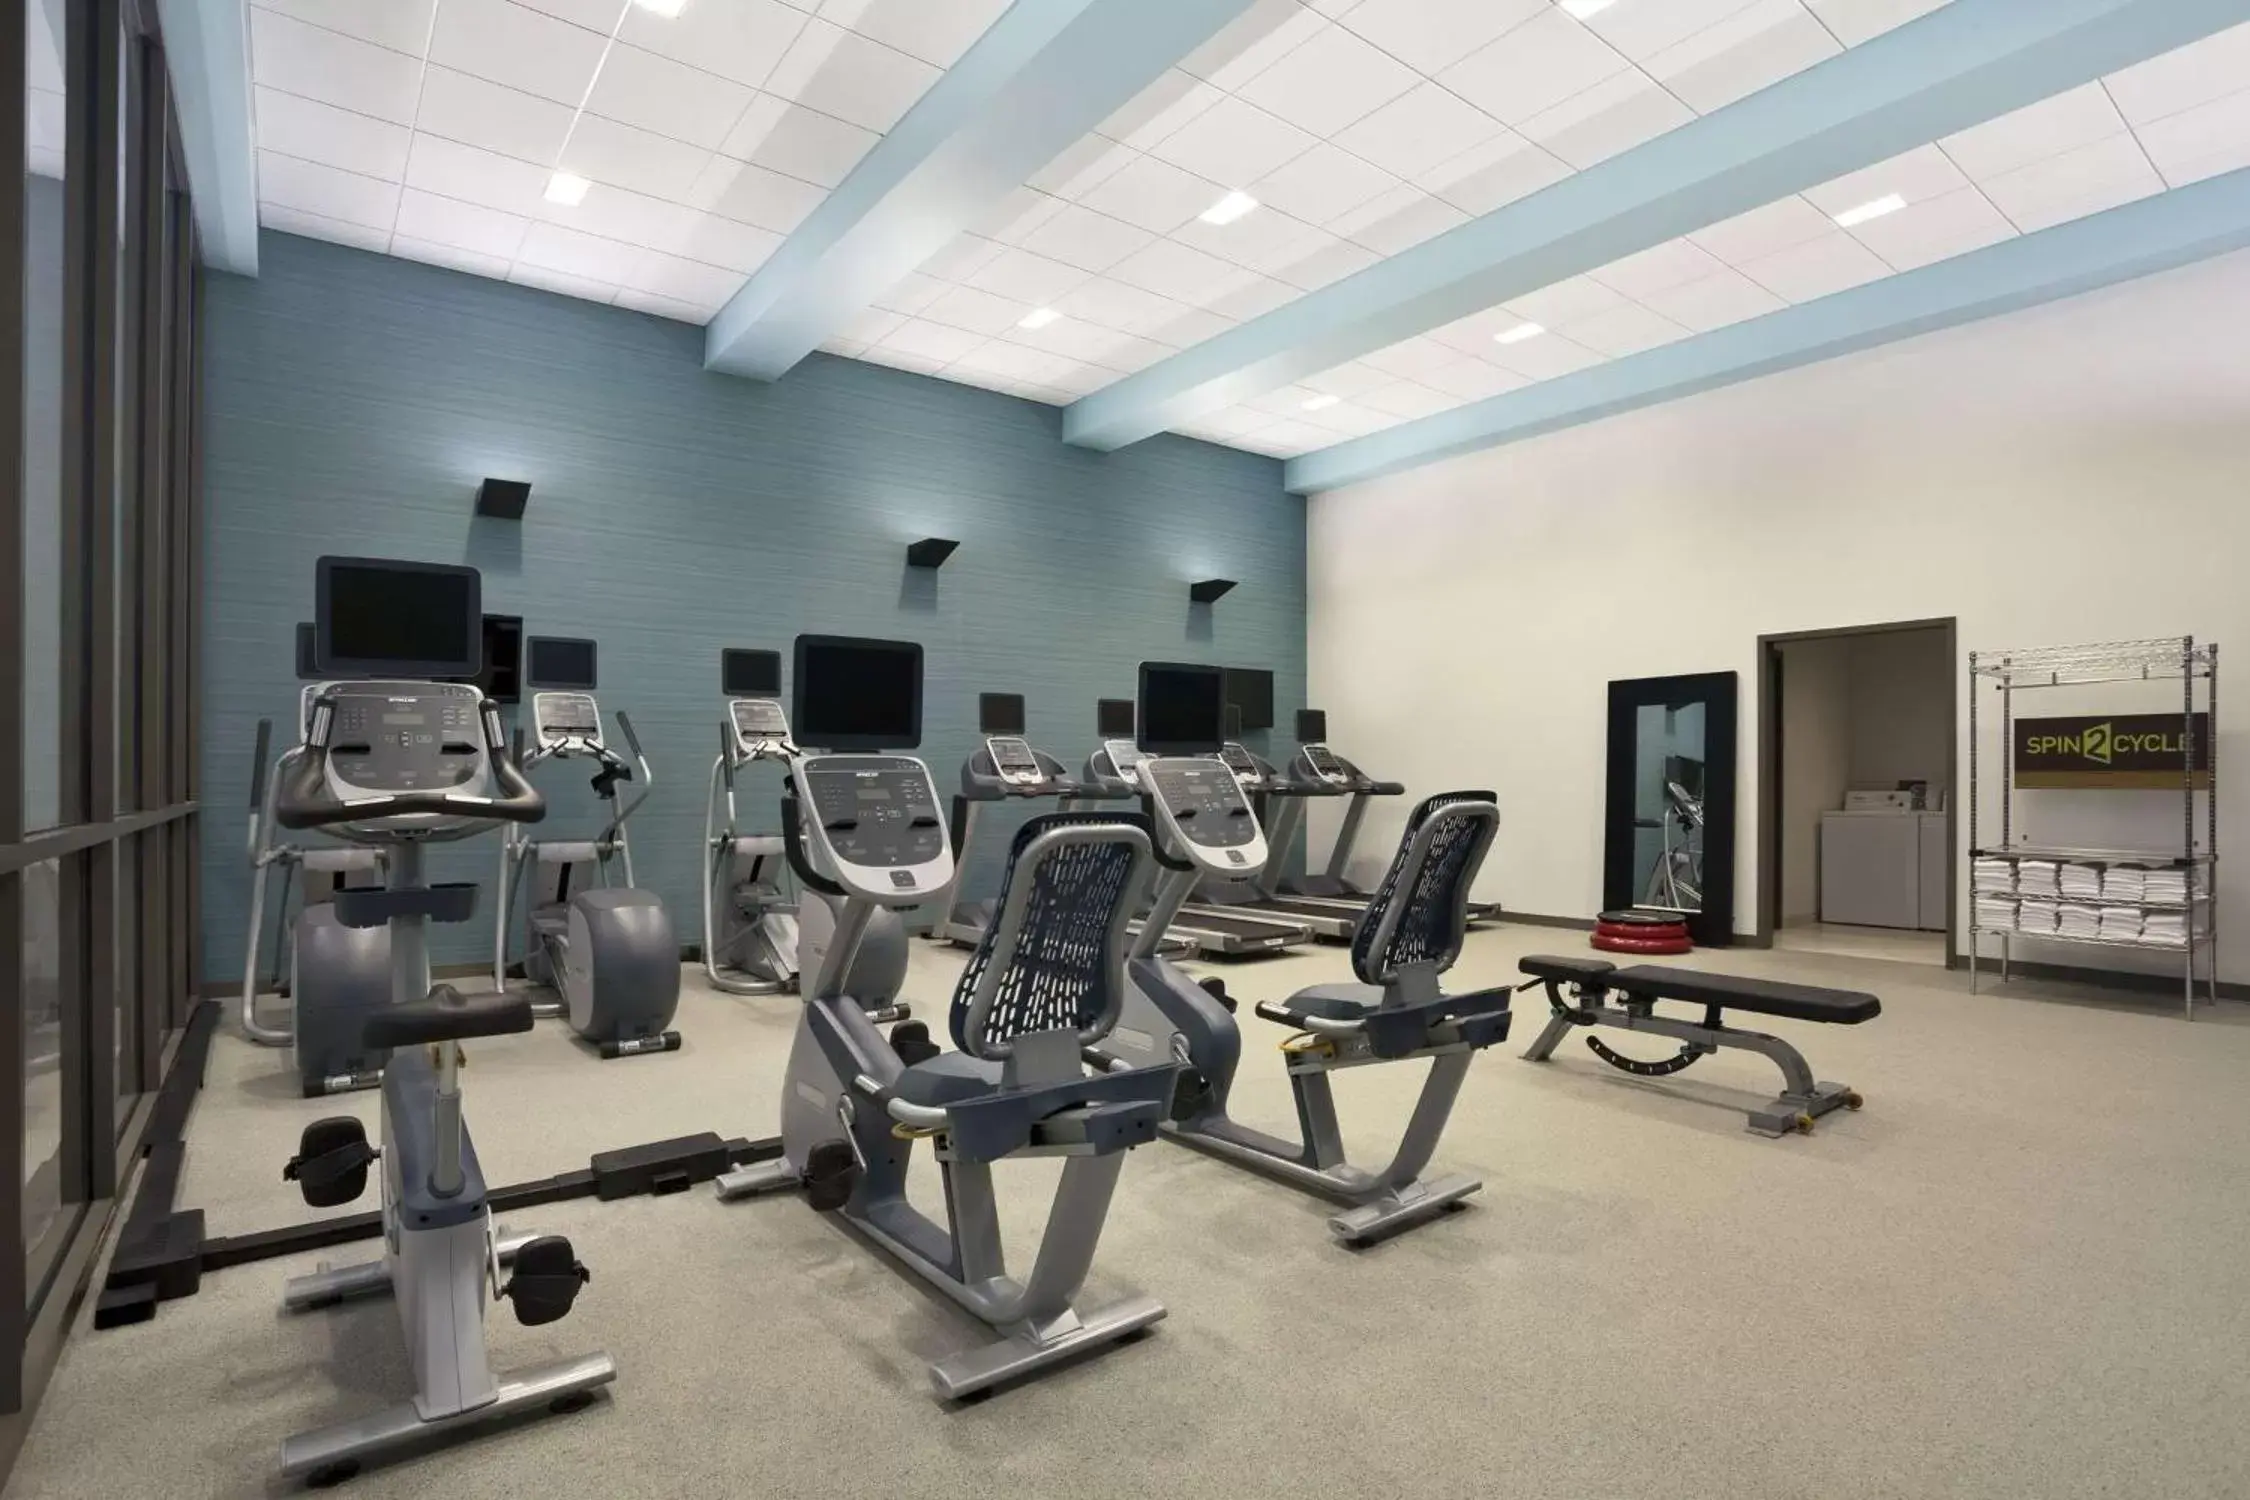 Fitness centre/facilities, Fitness Center/Facilities in Home2 Suites by Hilton Philadelphia Convention Center